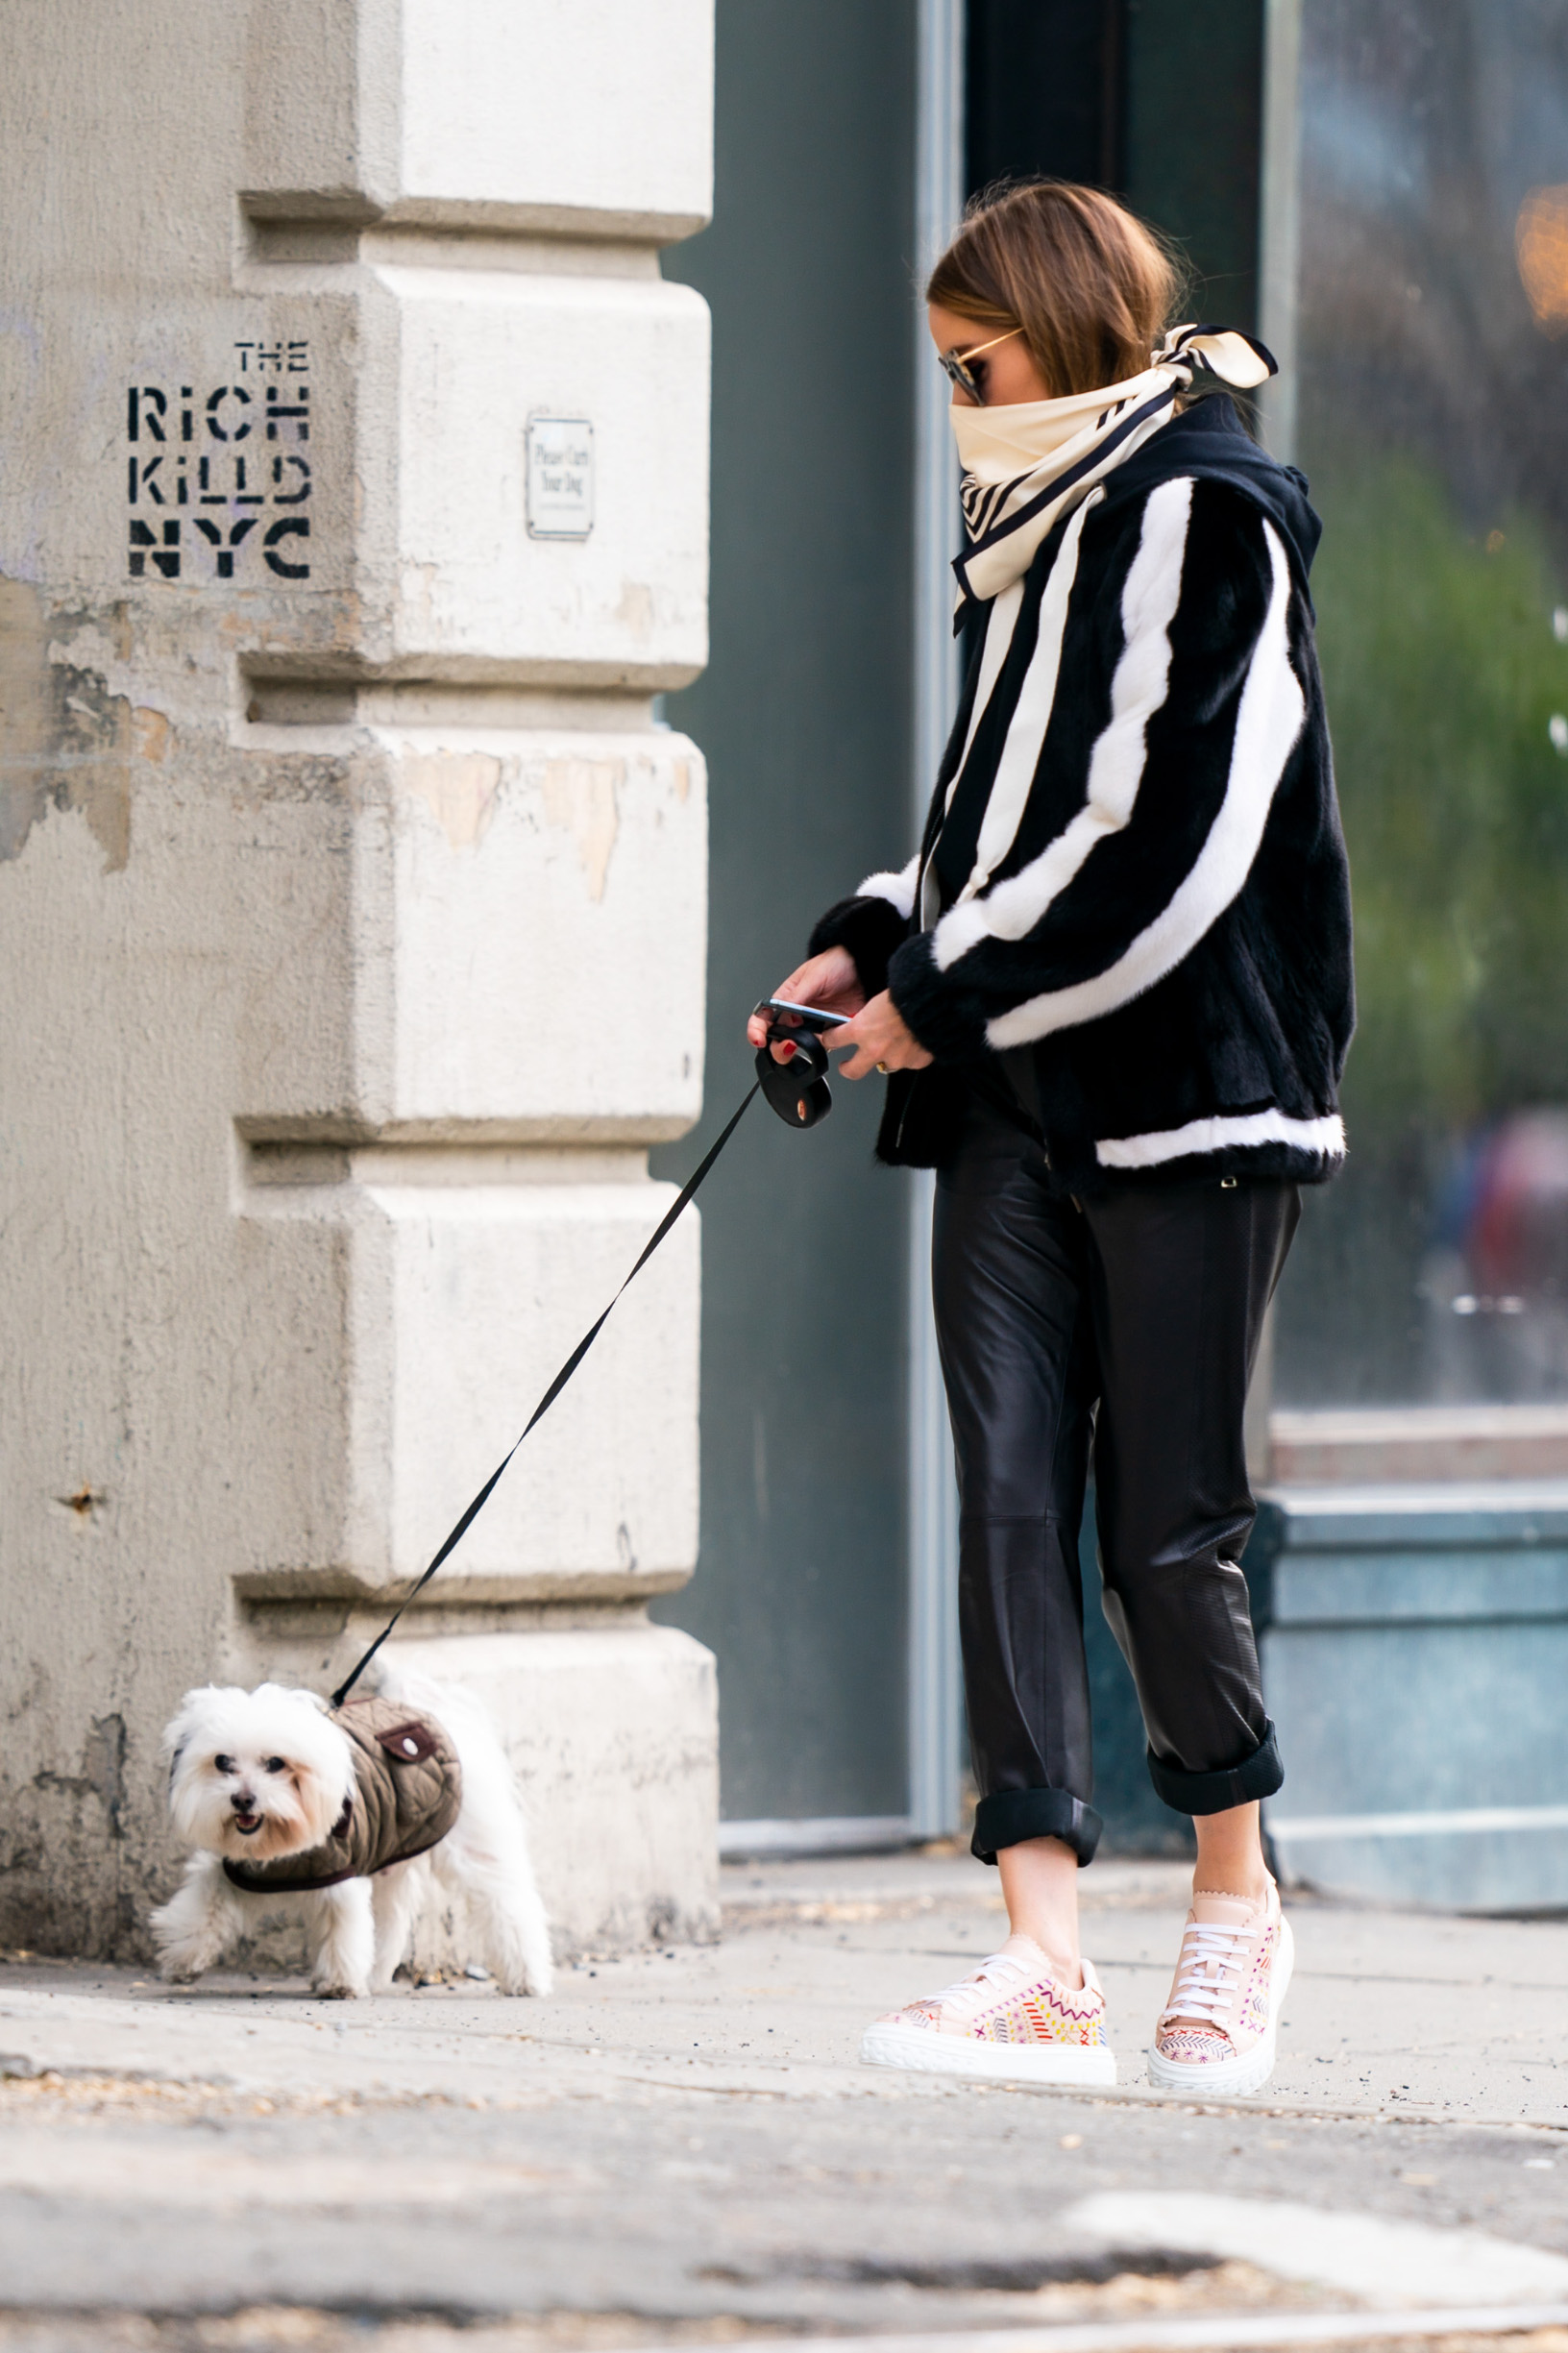 04/28/2020 EXCLUSIVE: Olivia Palermo steps out for a dog walk in New York City. The 34 year old socialite wore a scarf over her mouth, black & white teddy coat, black trousers, and pink trainers., Image: 515744880, License: Rights-managed, Restrictions: Exclusive NO usage without agreed price and terms. Please contact sales@theimagedirect.com, Model Release: no, Credit line: TheImageDirect.com / The Image Direct / Profimedia